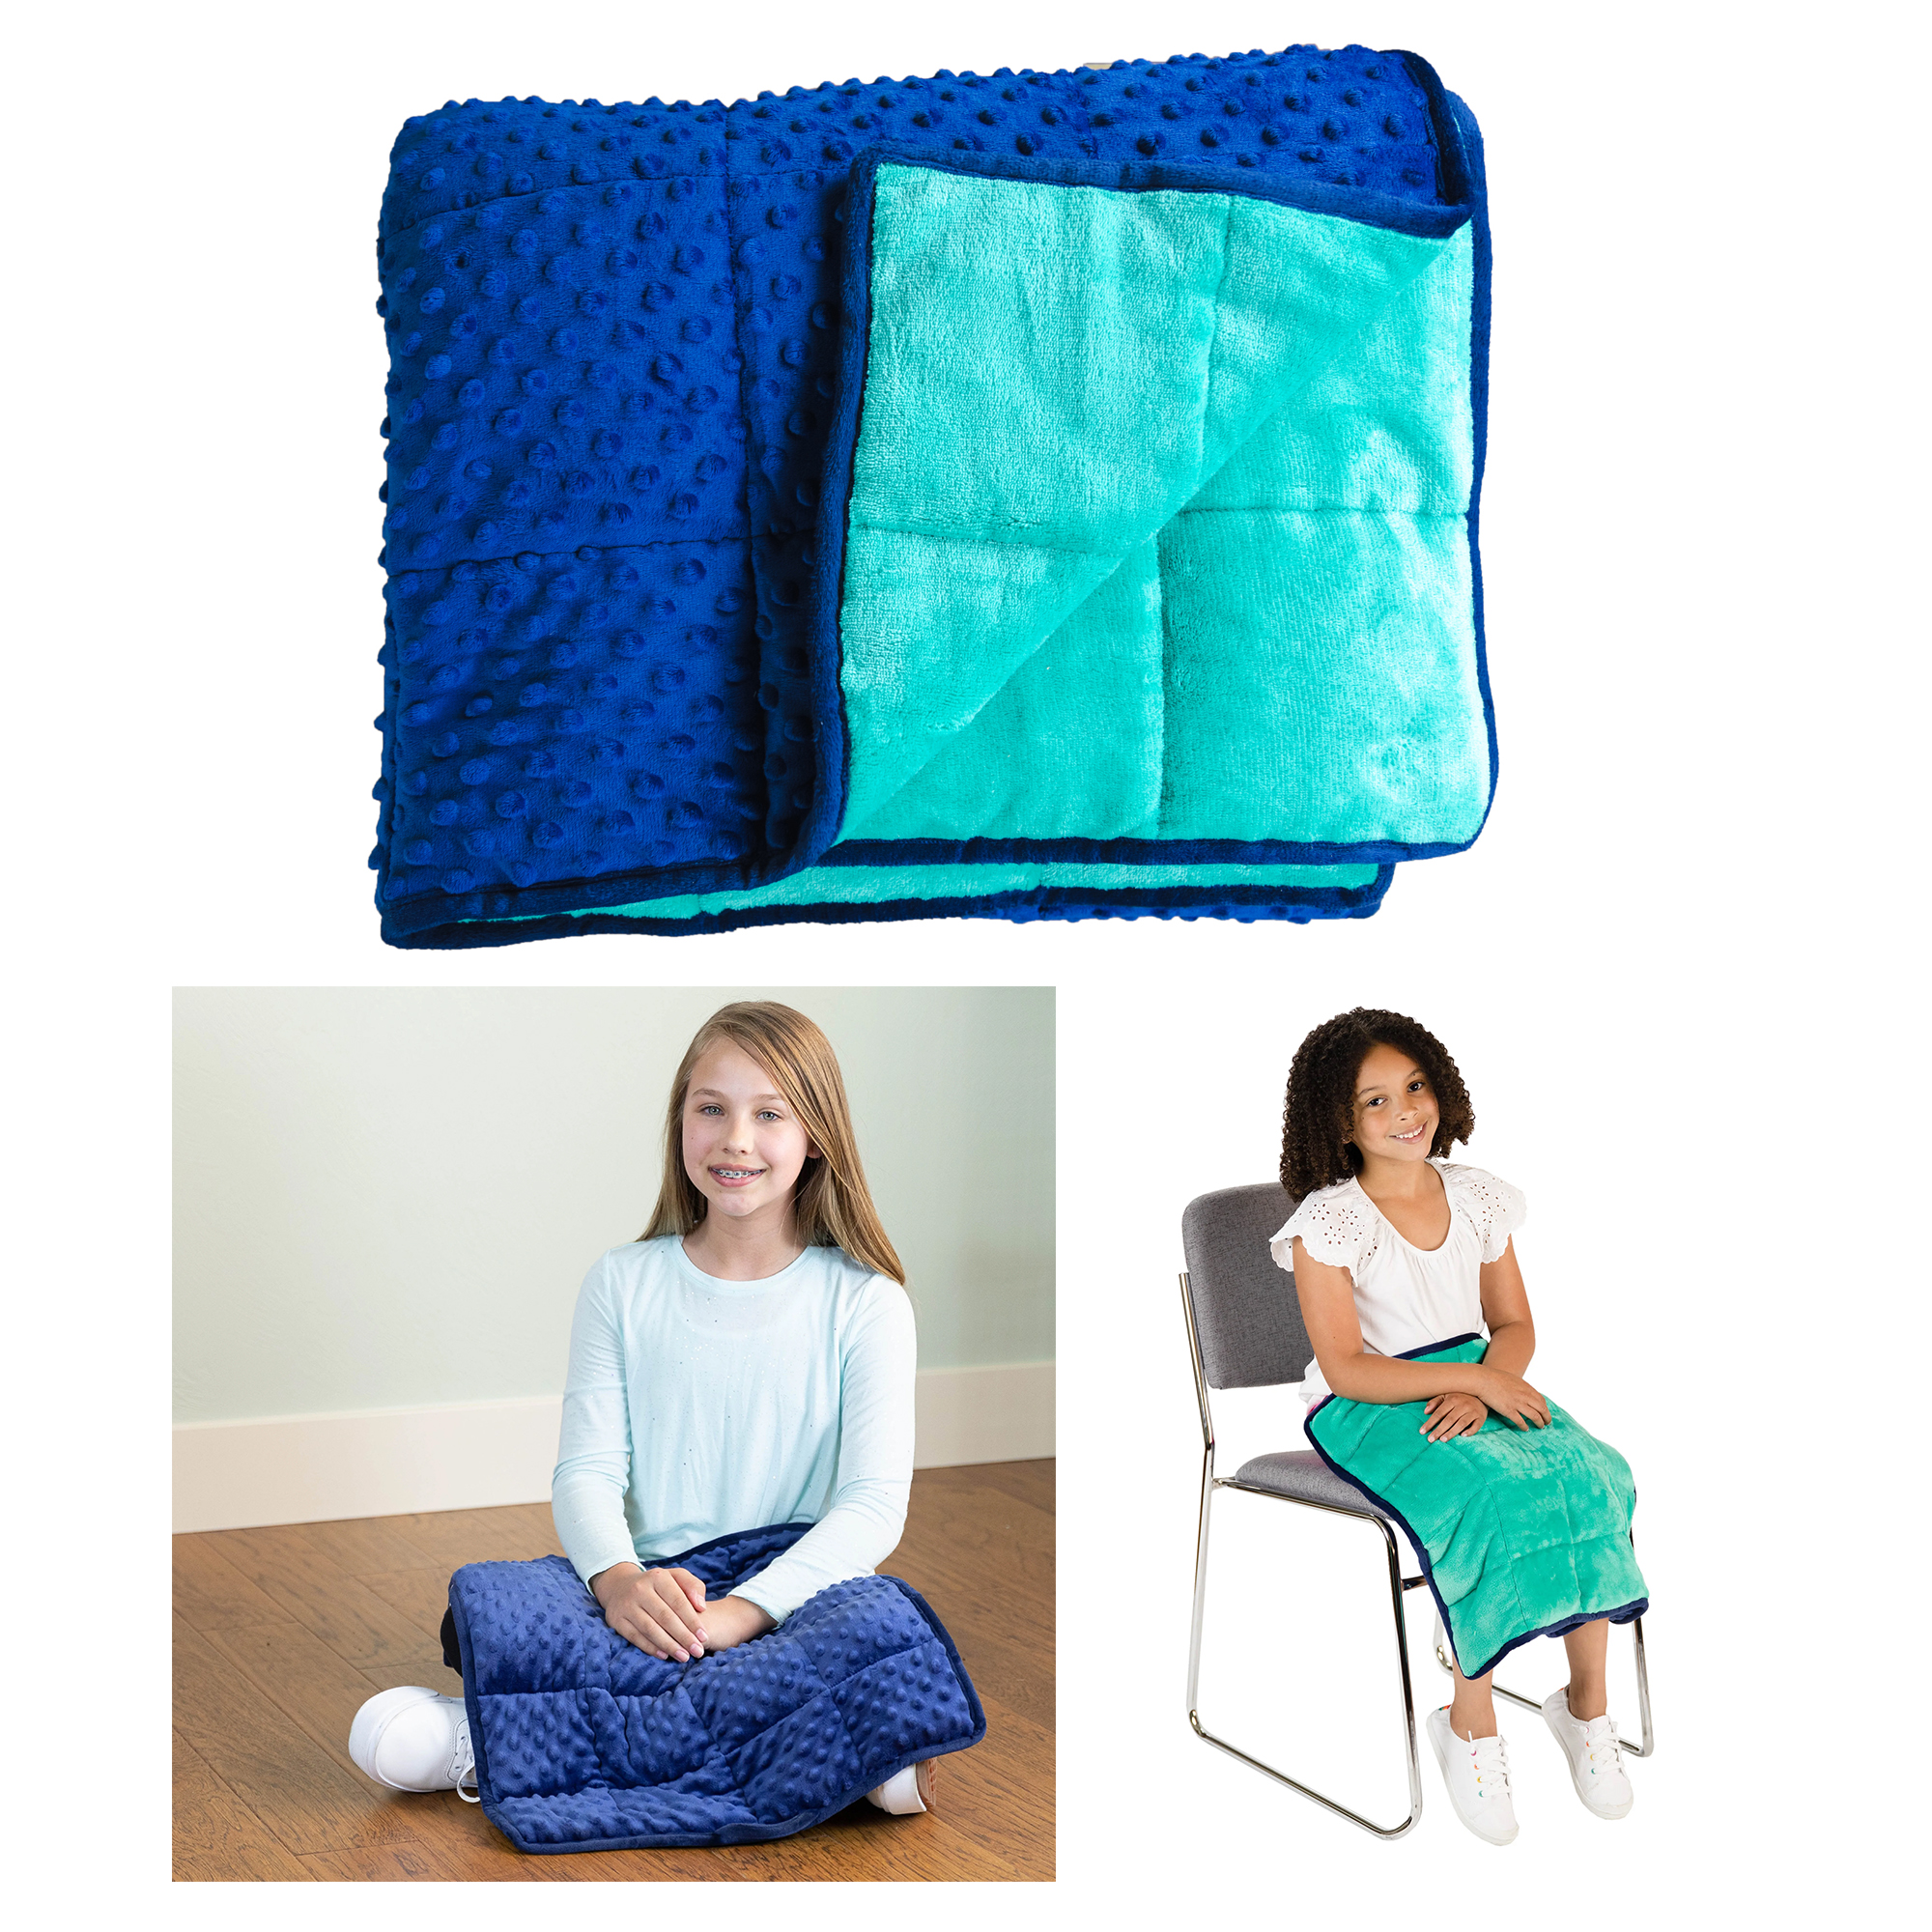 Bouncyband Soft Fleece Weighted 7lb Small Sensory Blanket for Kids, 56" x 36"